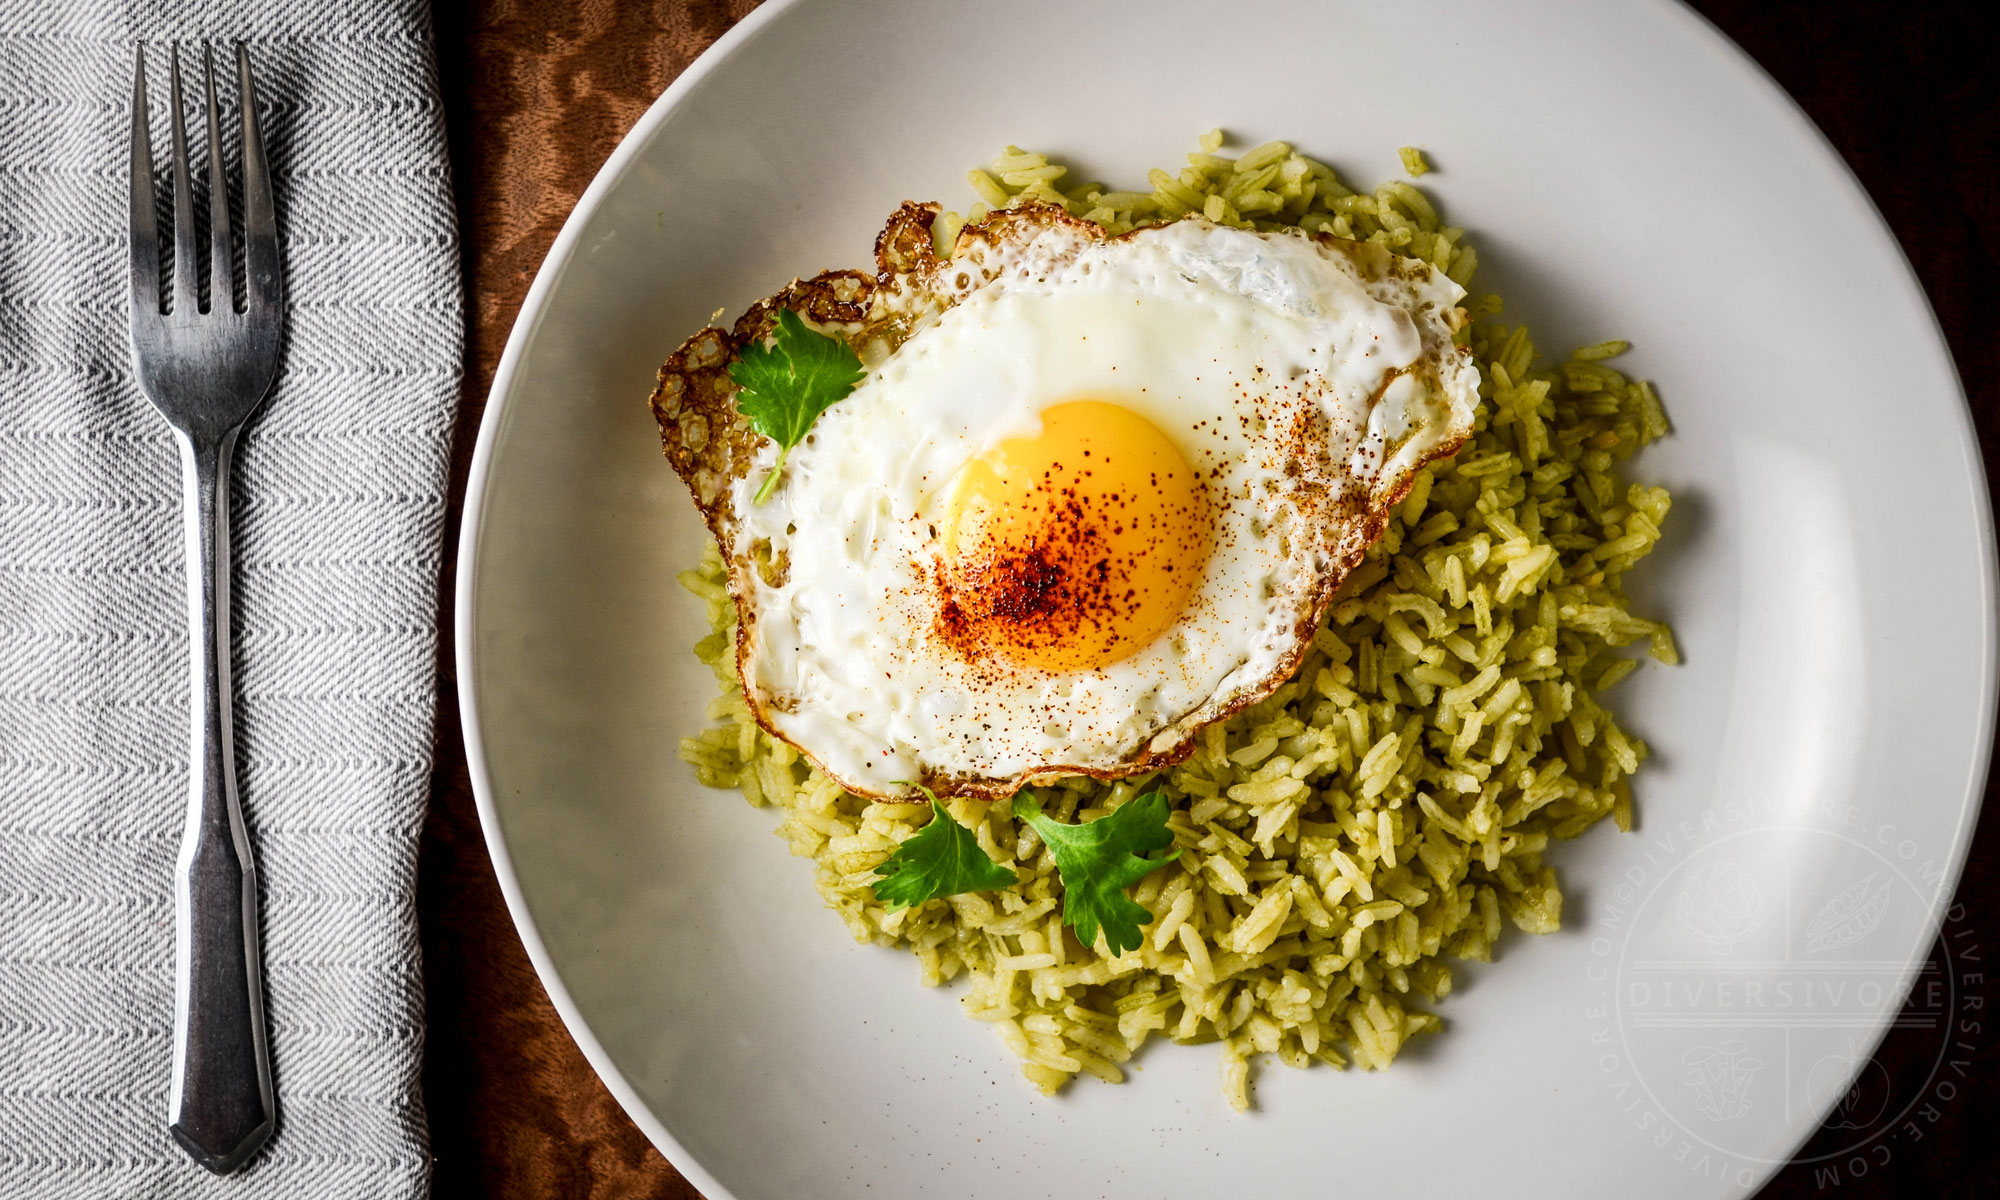 Arroz verde (Mexican Green Rice) topped with a fried egg and ancho chile powder